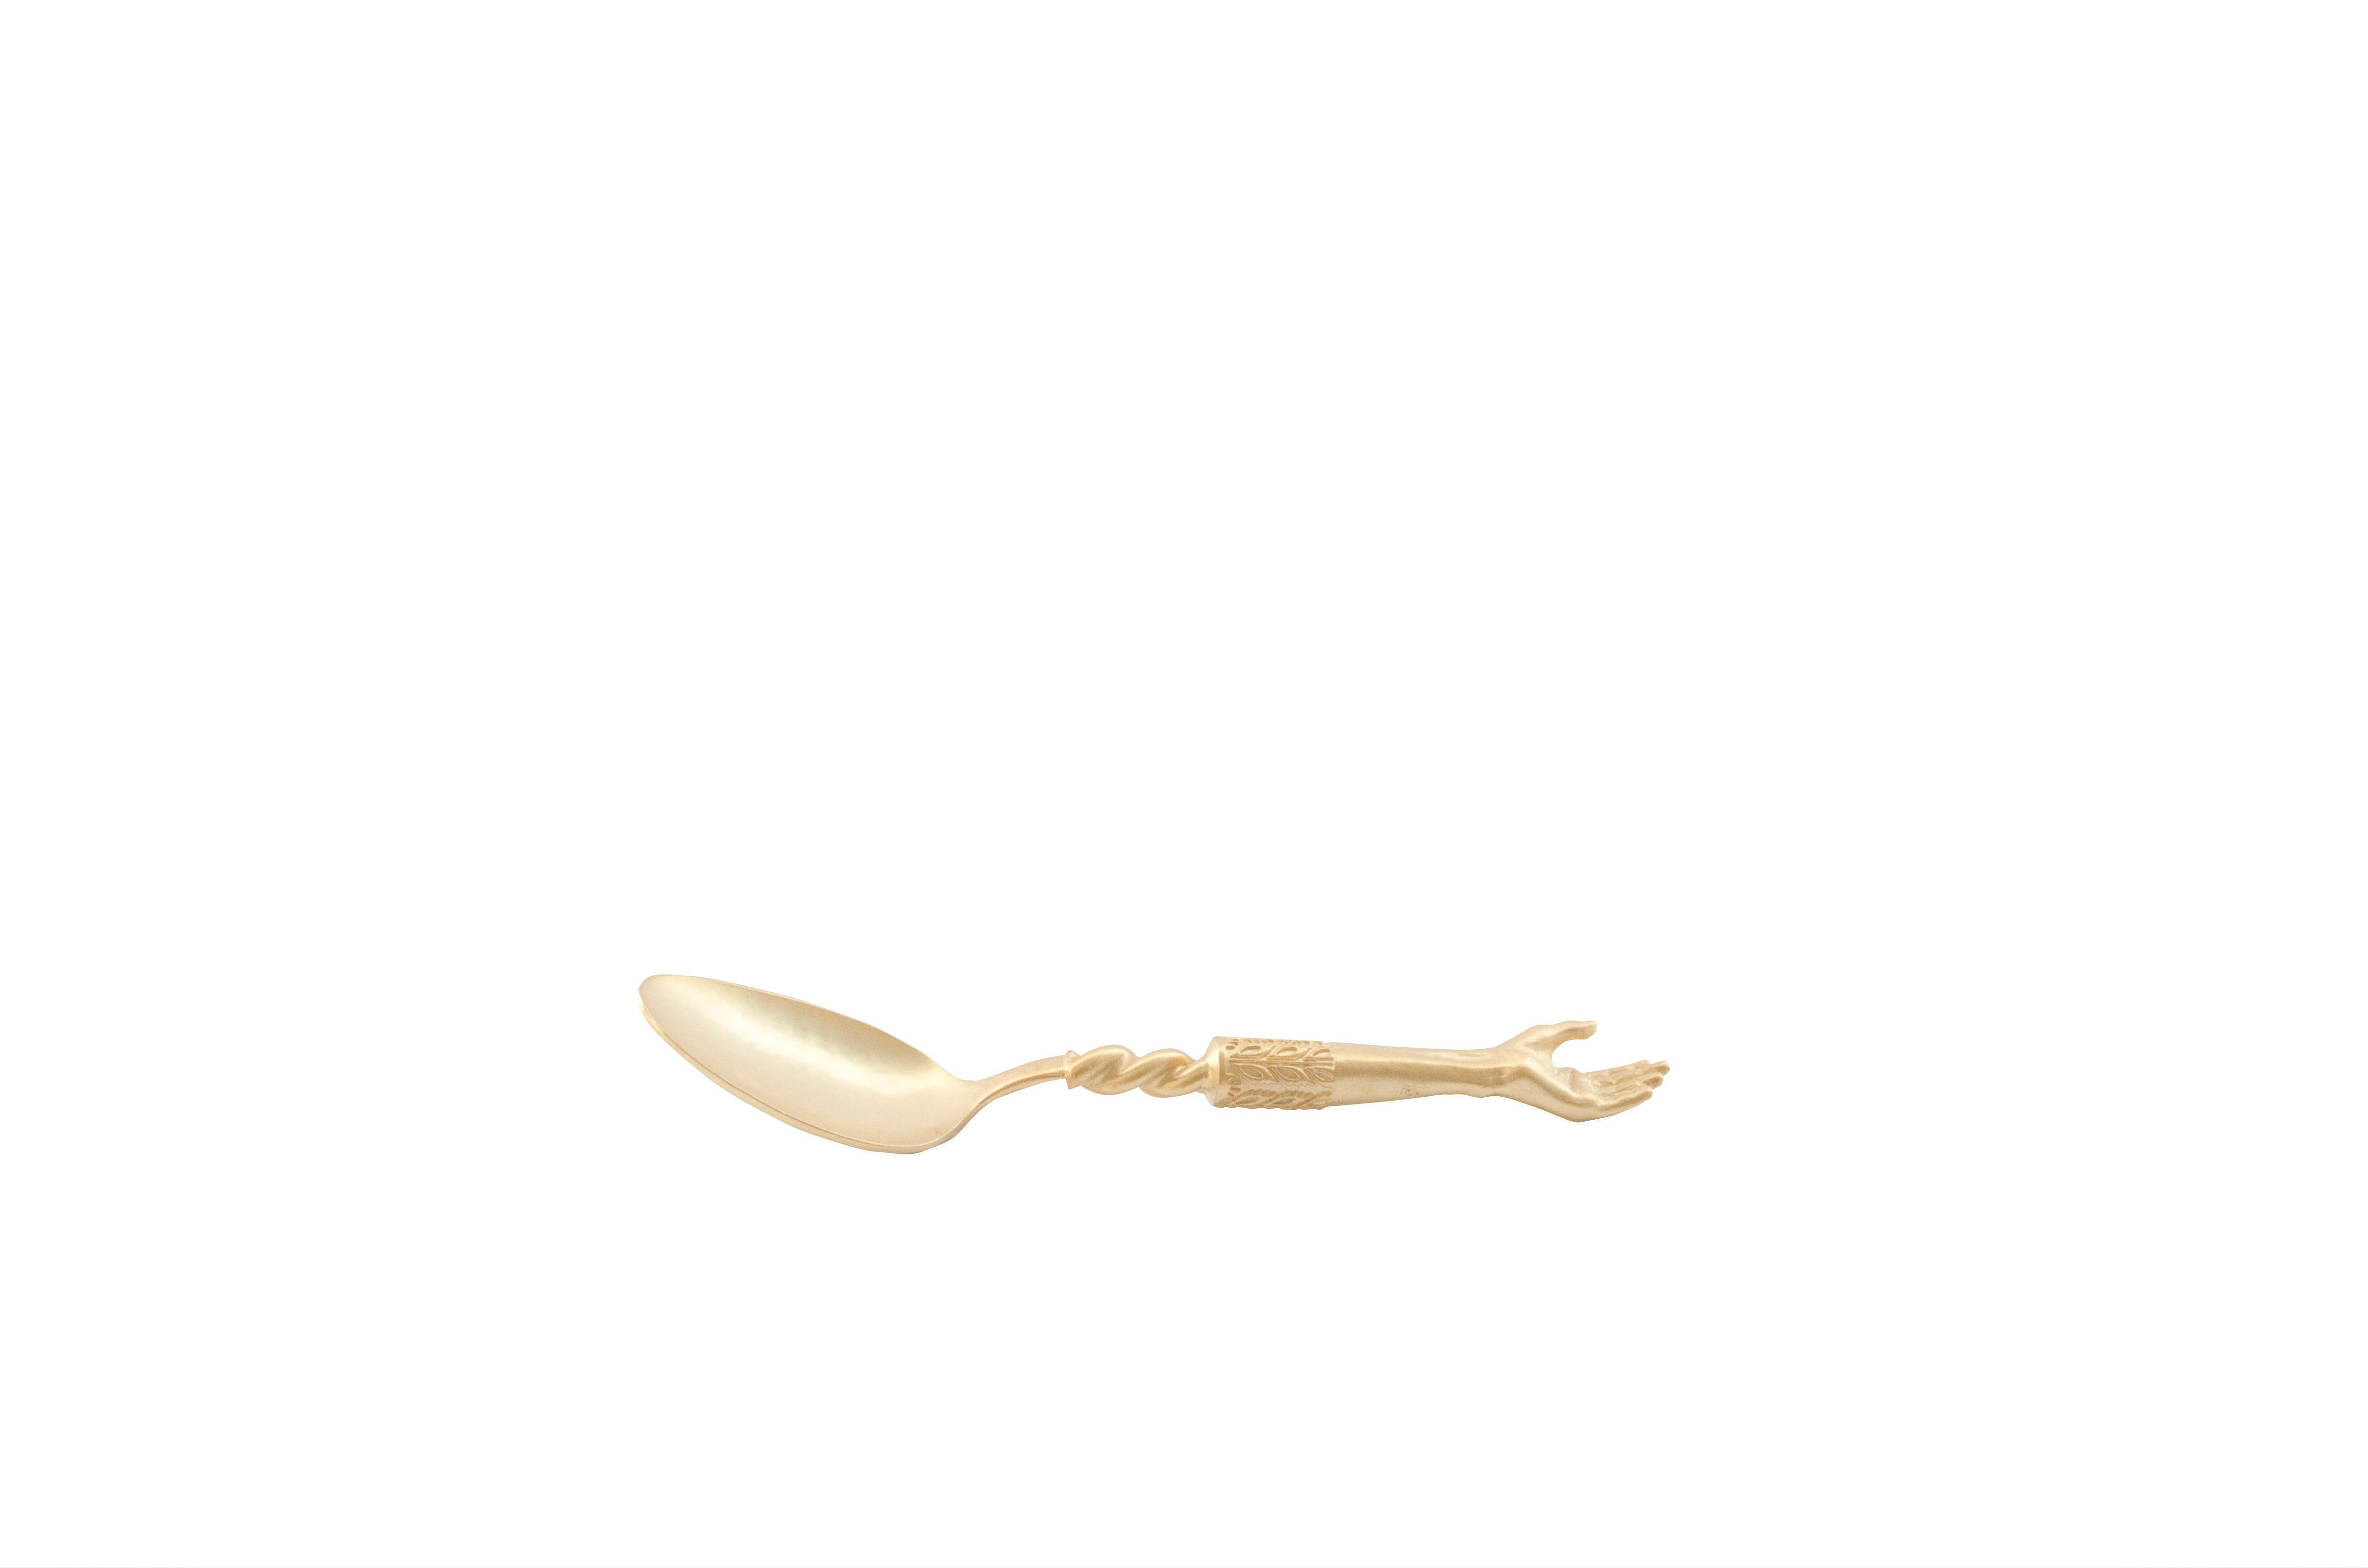 Neoclassical Golden Plated Hand Tea Spoon Handcrafted Natalia Criado For Sale